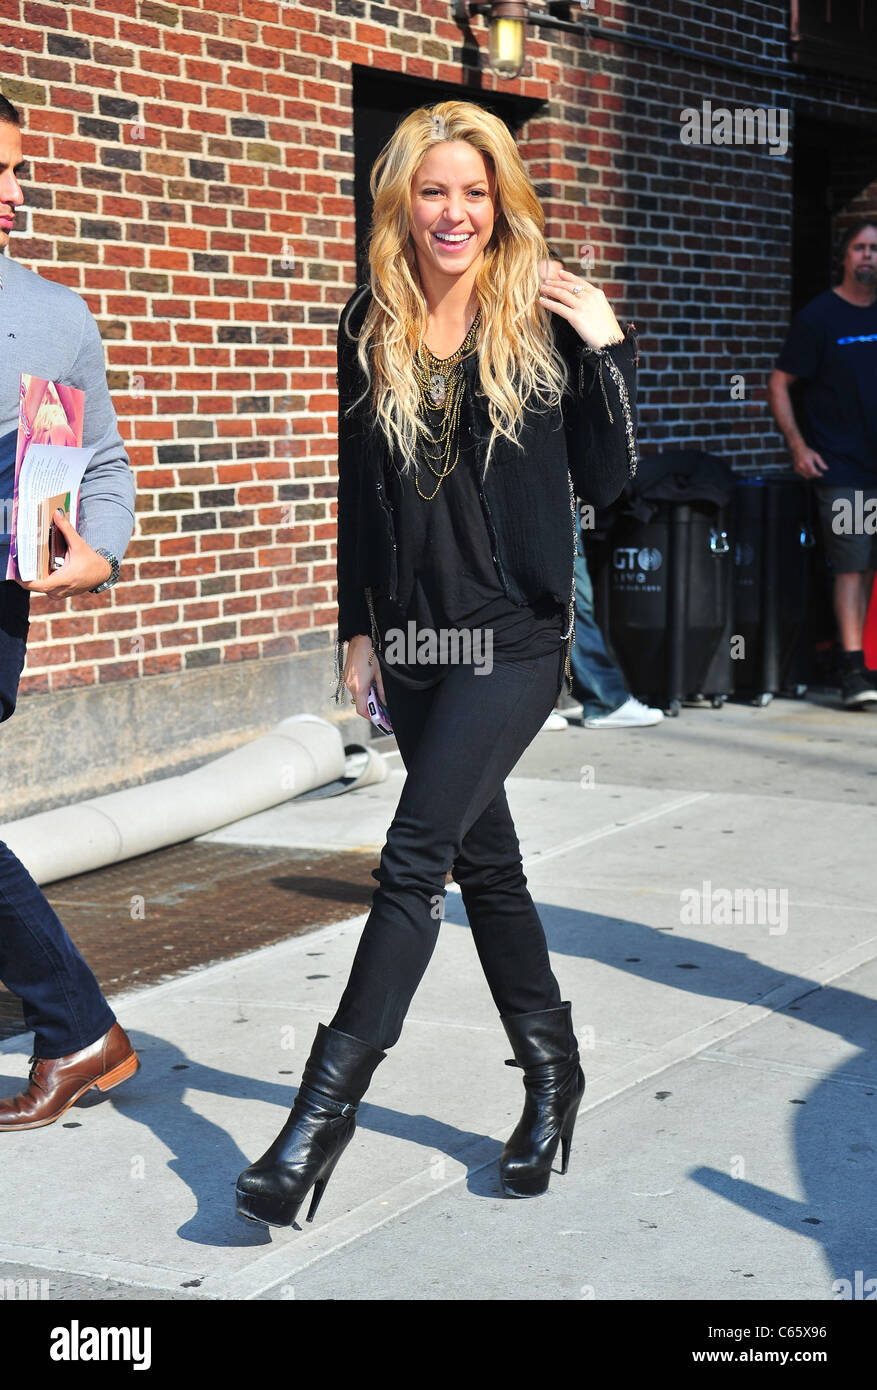 Shakira at talk show appearance for The Late Show with David Letterman -  THU, Ed Sullivan Theater, New York, NY September 23, 2010. Photo By:  Gregorio T. Binuya/Everett Collection Stock Photo - Alamy